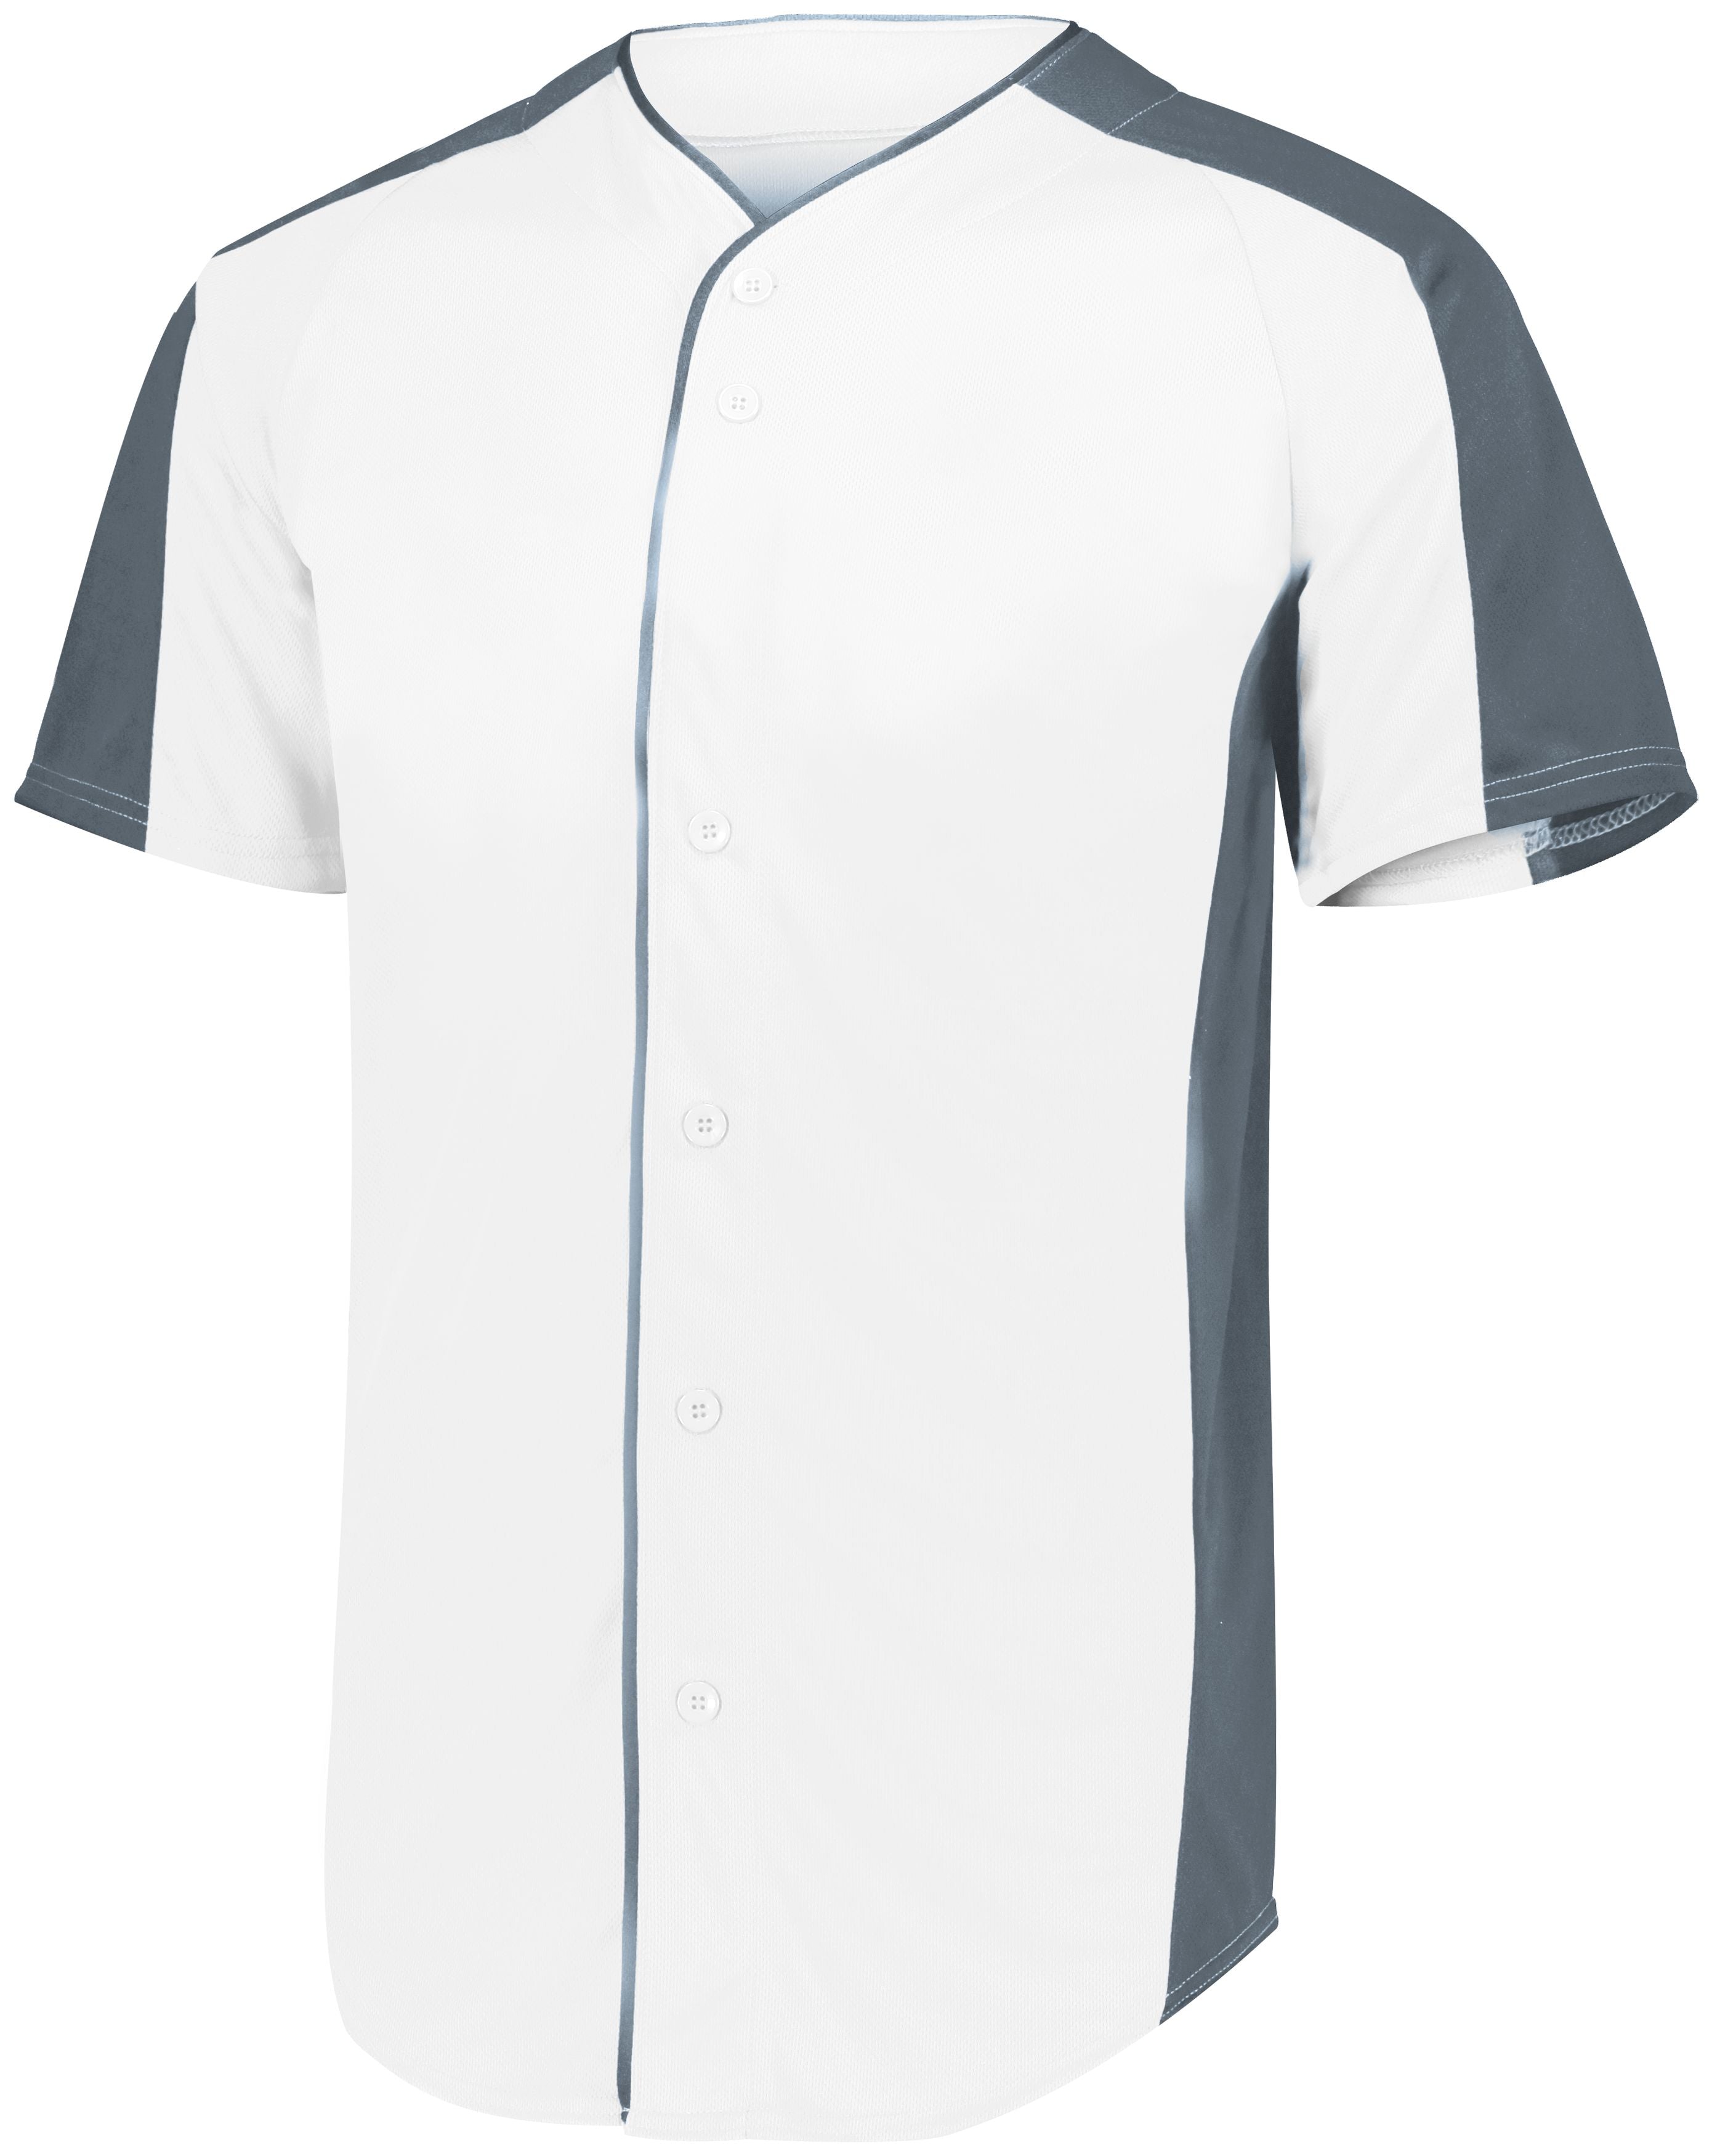 Augusta Sportswear Full-Button Baseball Jersey in White/Graphite  -Part of the Adult, Adult-Jersey, Augusta-Products, Baseball, Shirts, All-Sports, All-Sports-1 product lines at KanaleyCreations.com